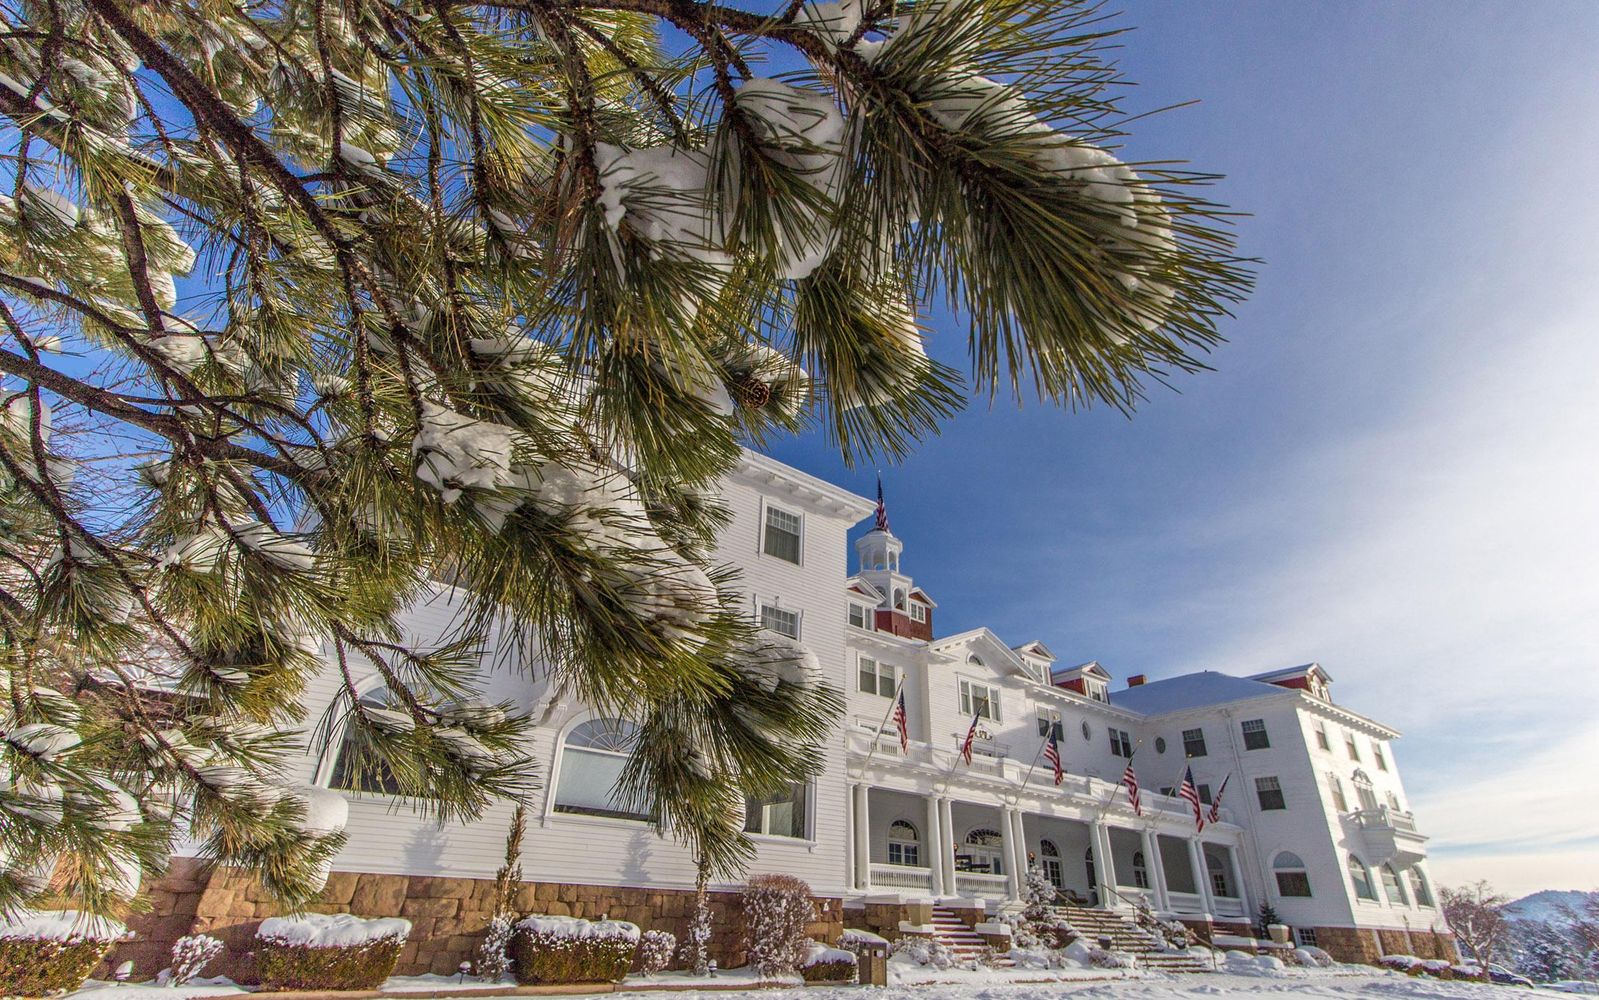 Colorado's 'The Shining' Hotel Is Finally Getting That Hedge Maze